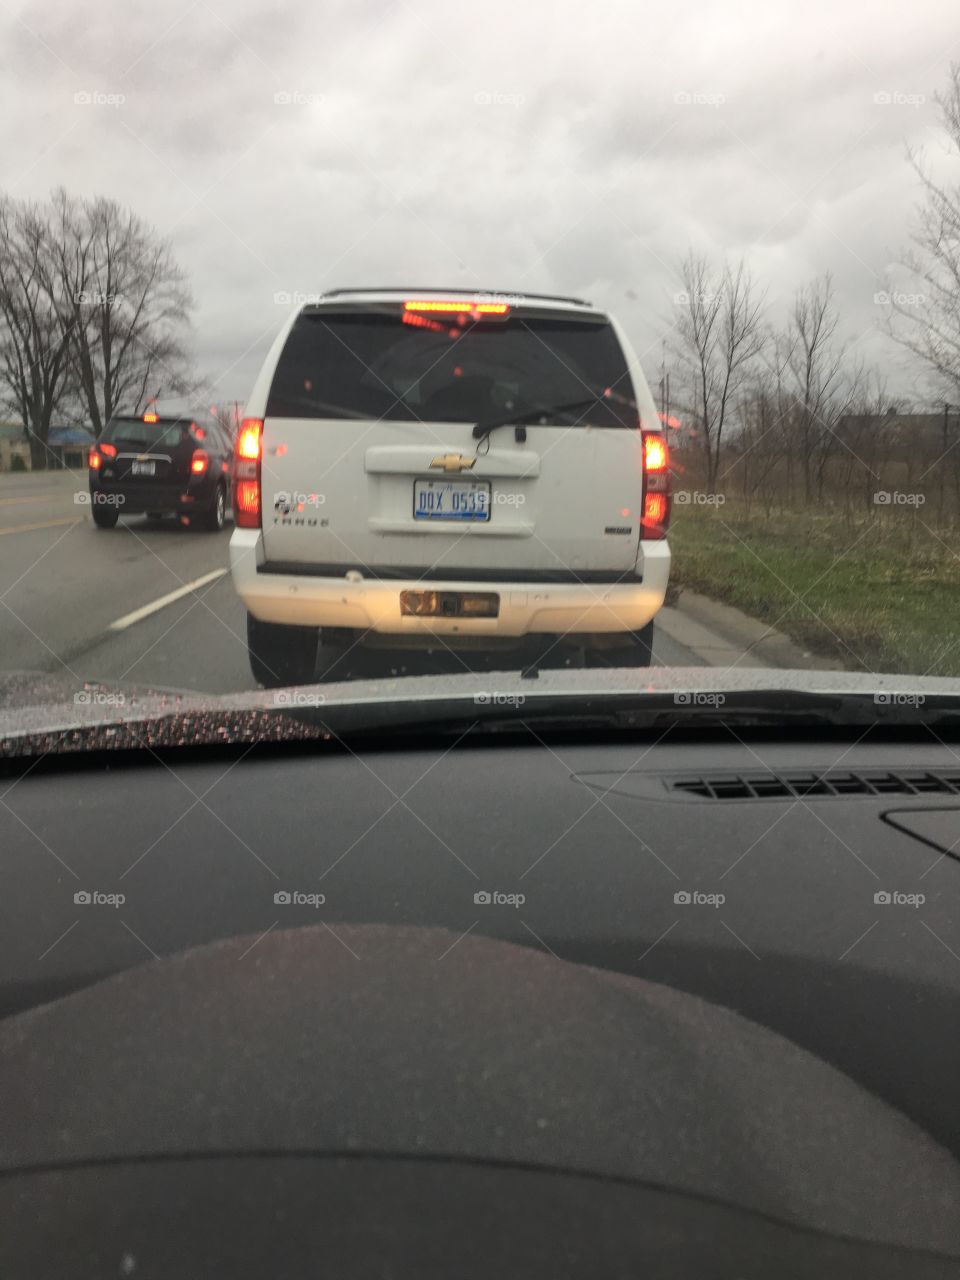 Stuck in traffic on a cloudy day.